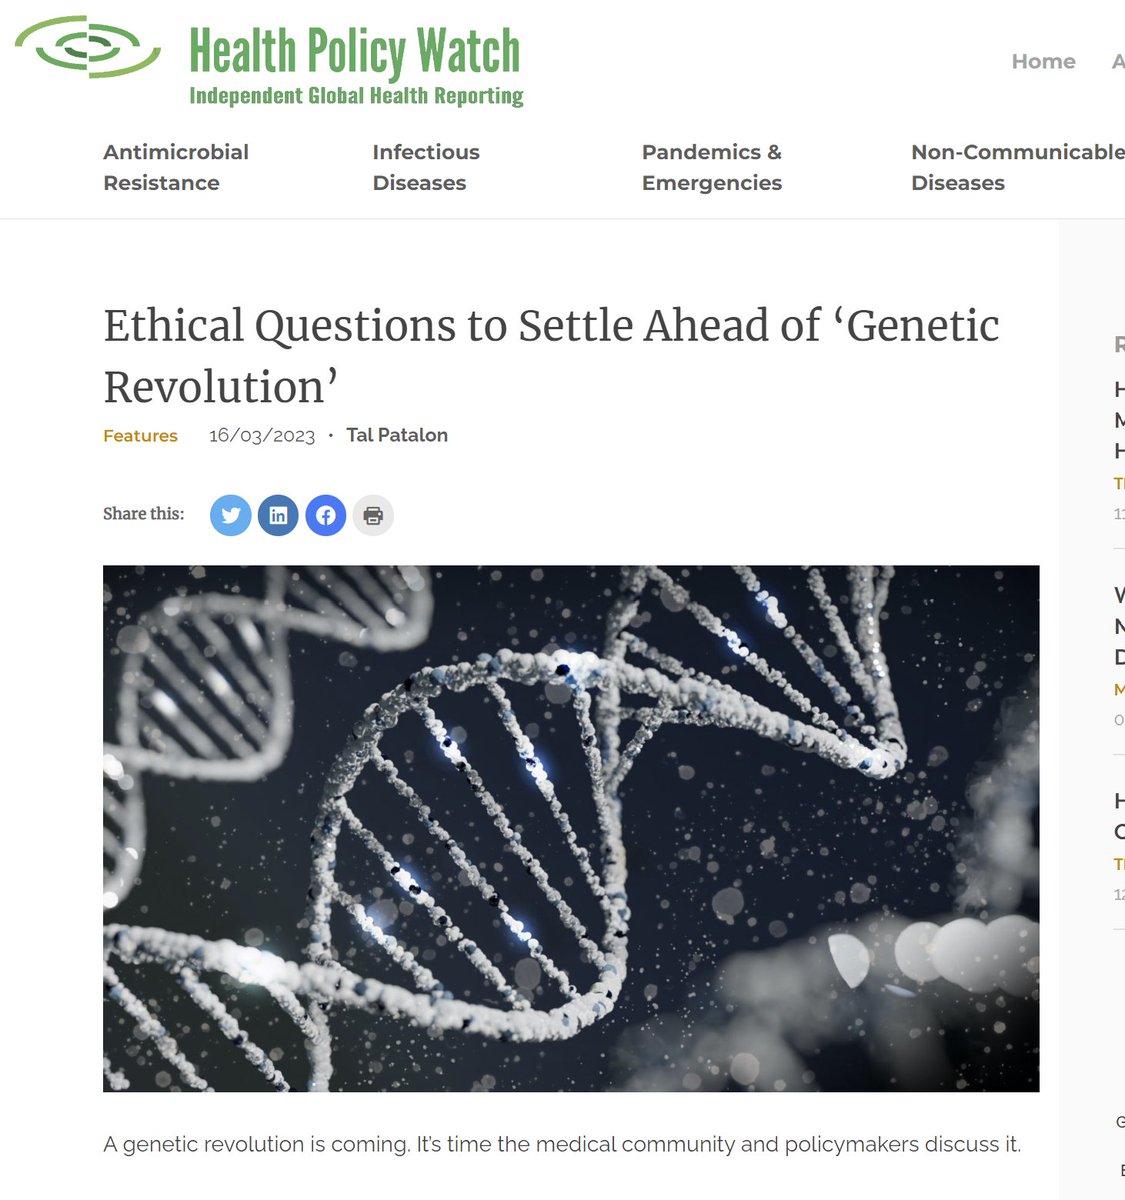 Just published in Health Policy Watch TOP STORIES!
Head of KSM, Dr. Tal Patalon's opinion column on the 'Ethical Questions to Settle Ahead of ‘Genetic Revolution’'
Read here: bit.ly/3mYfdFY
@TalPatalon @HealthPolicyW